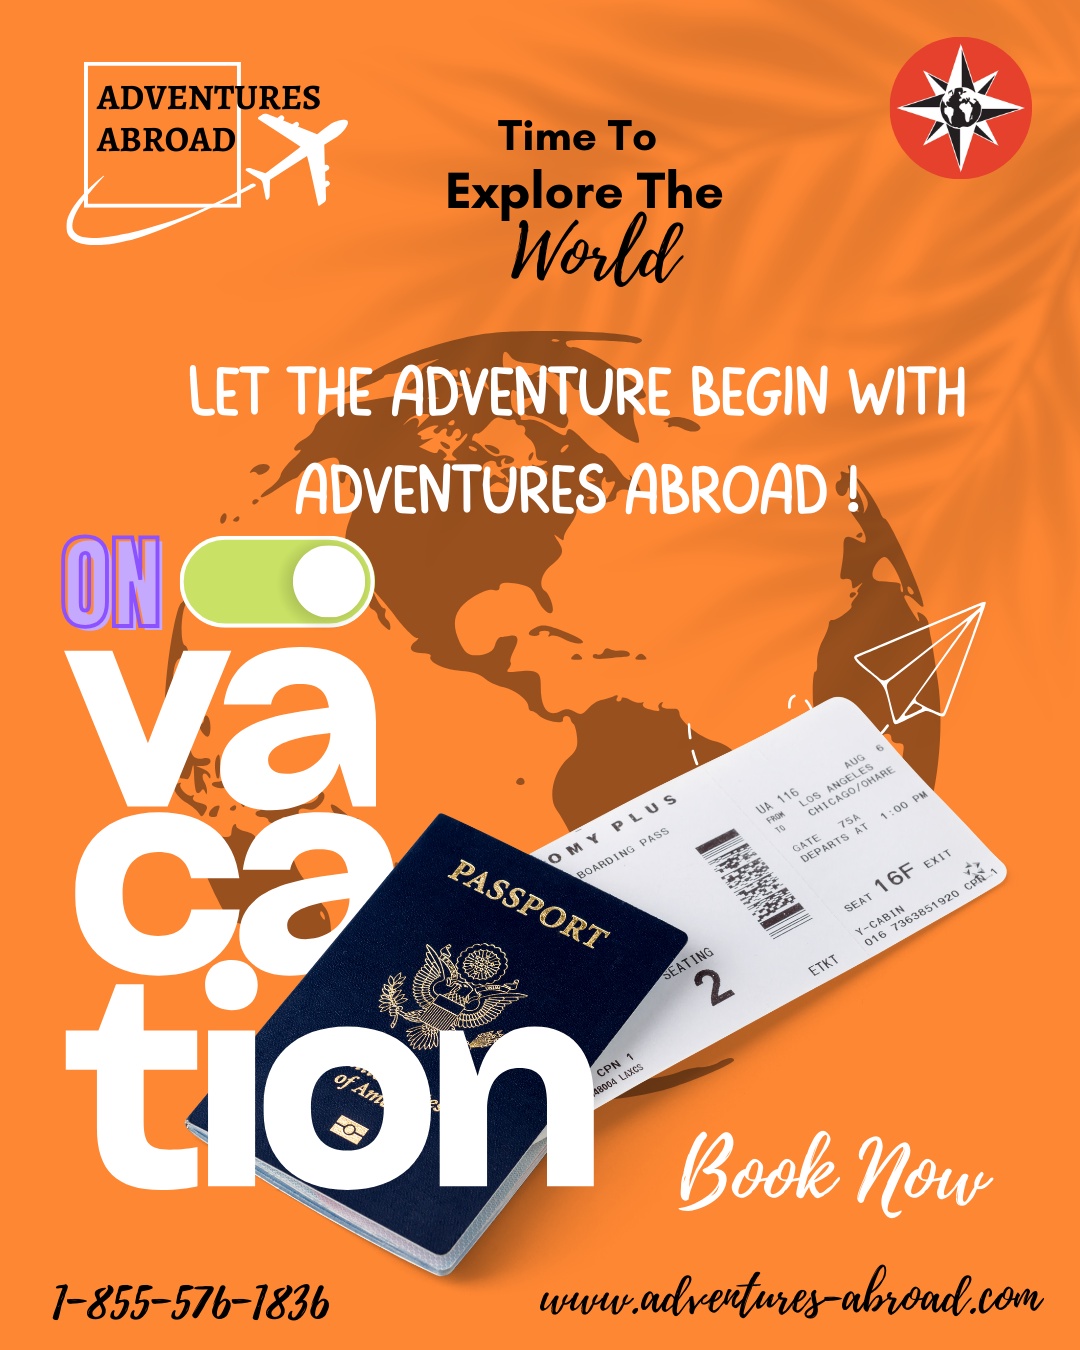 Embark on the Journey of a Lifetime with Adventures Abroad.